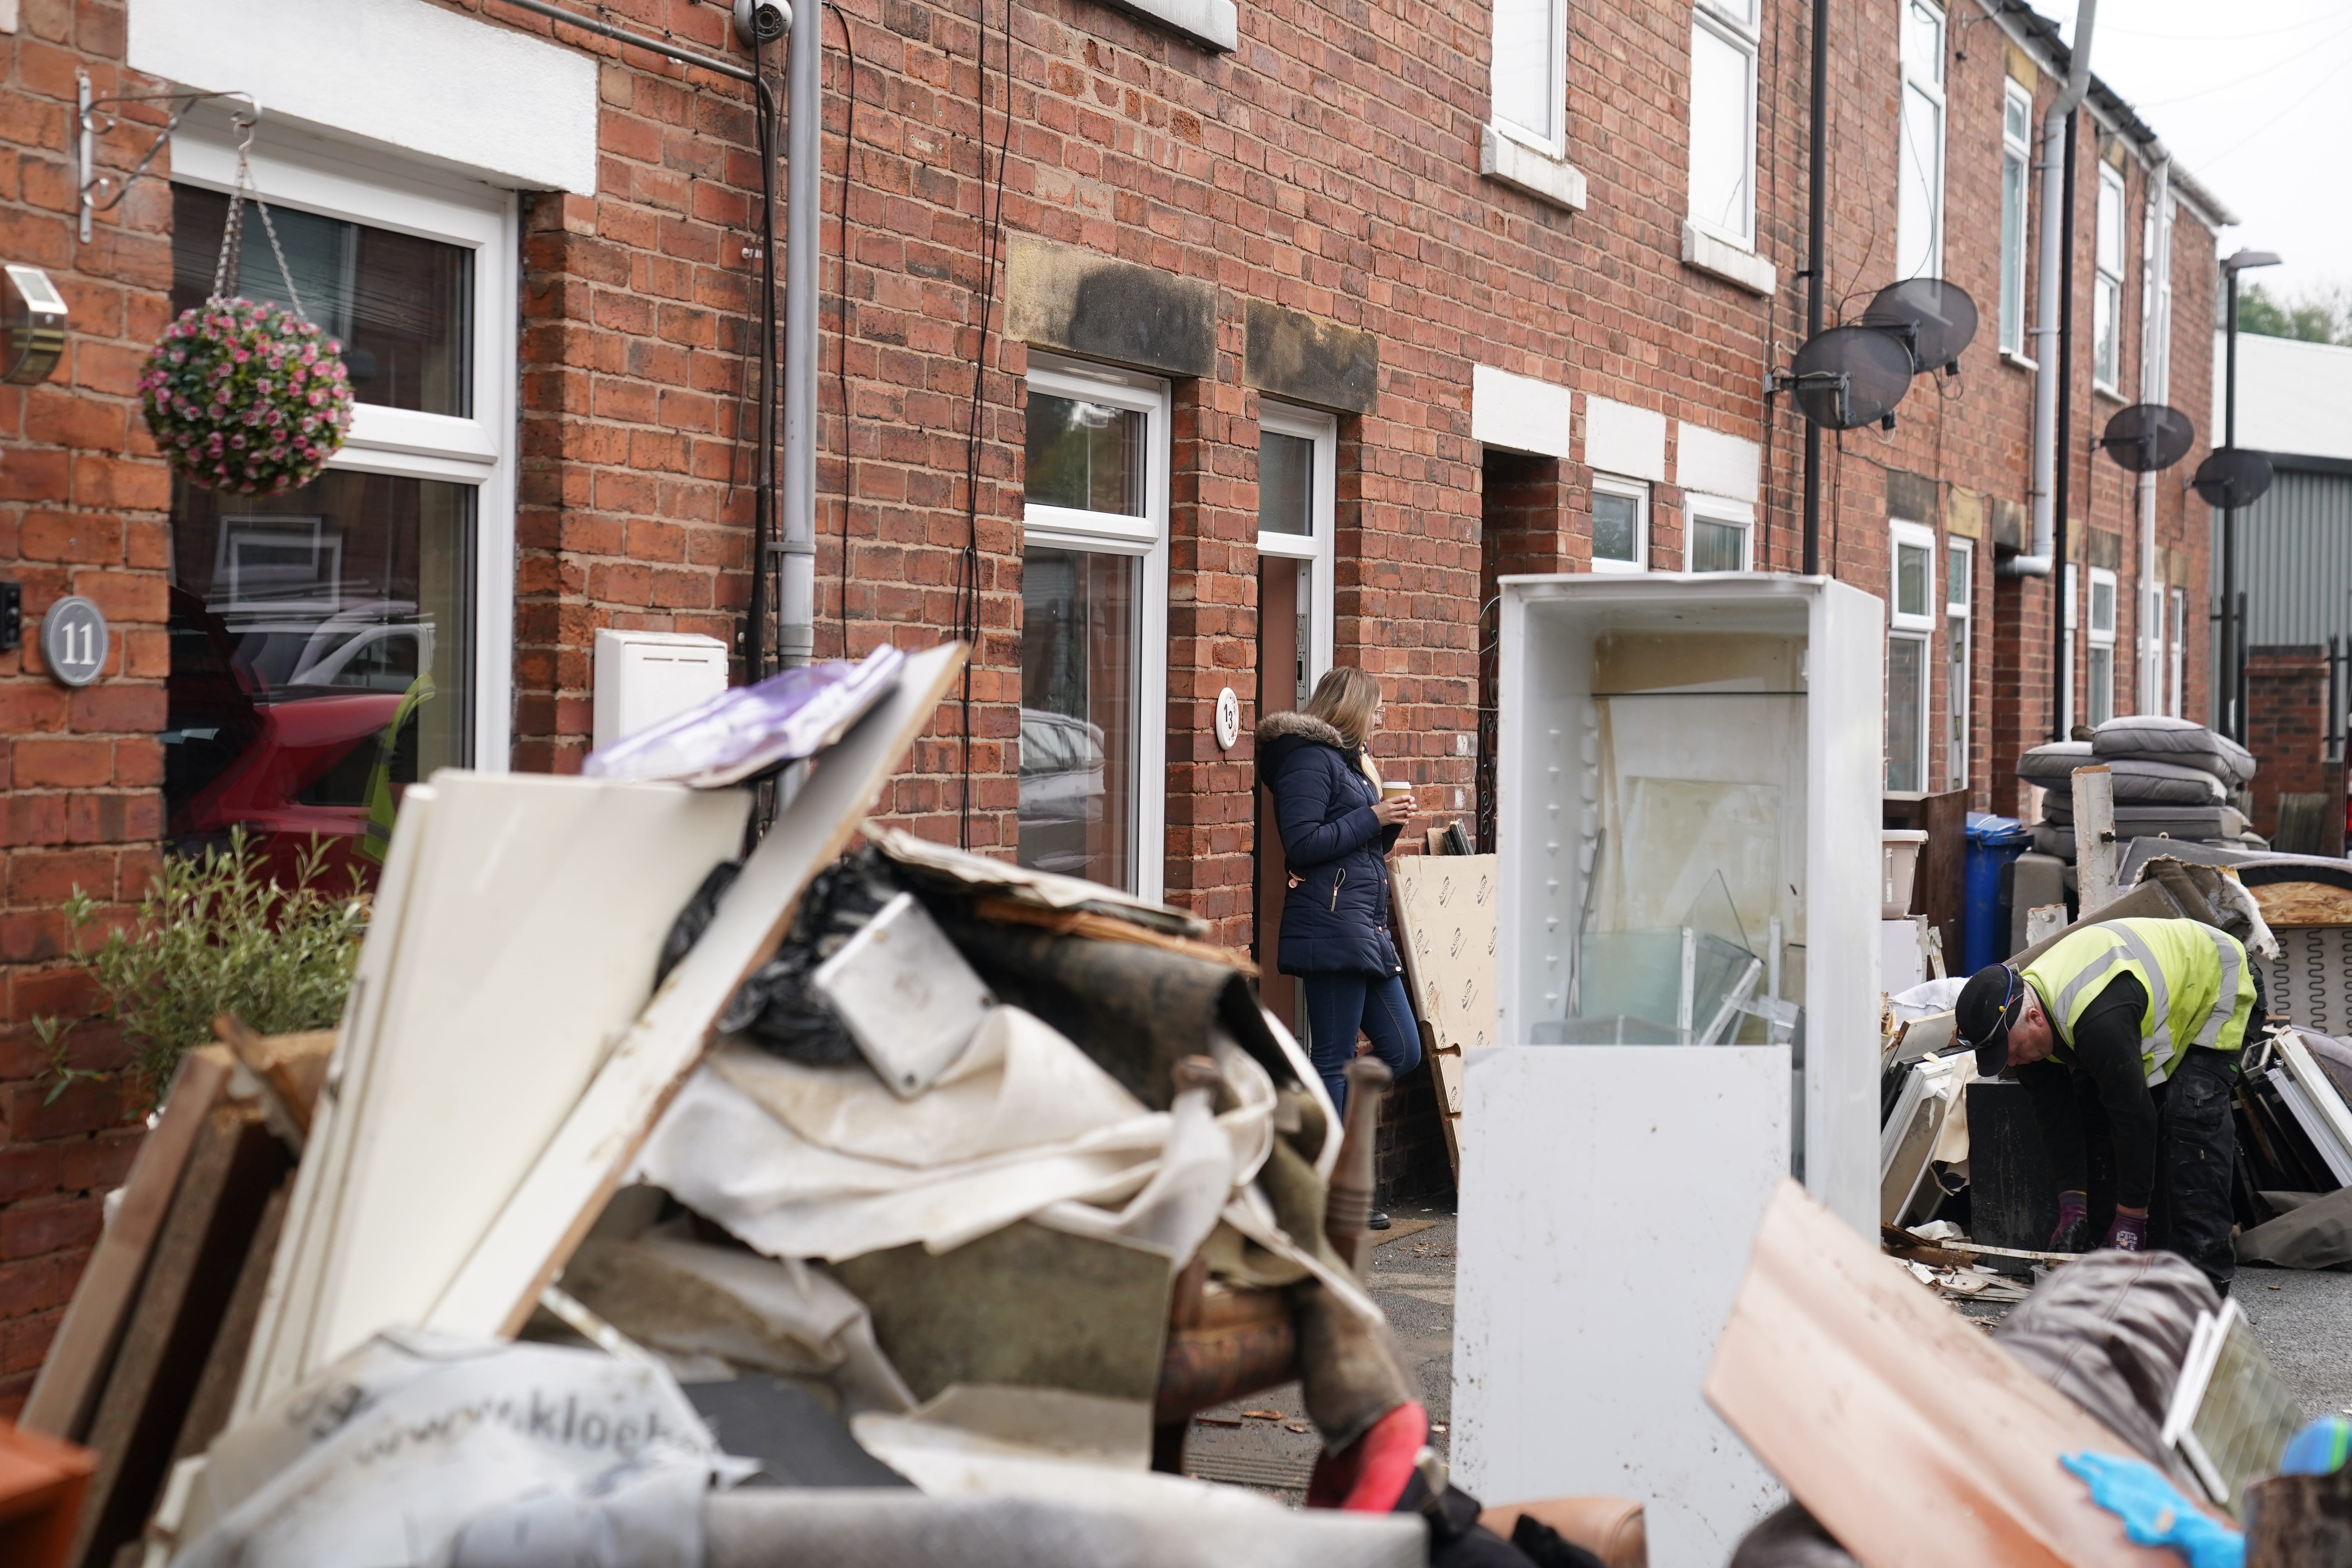 A resident looks at a local authority worker collecting damaged furniture from outside a property on Sherwood Street in Chesterfield